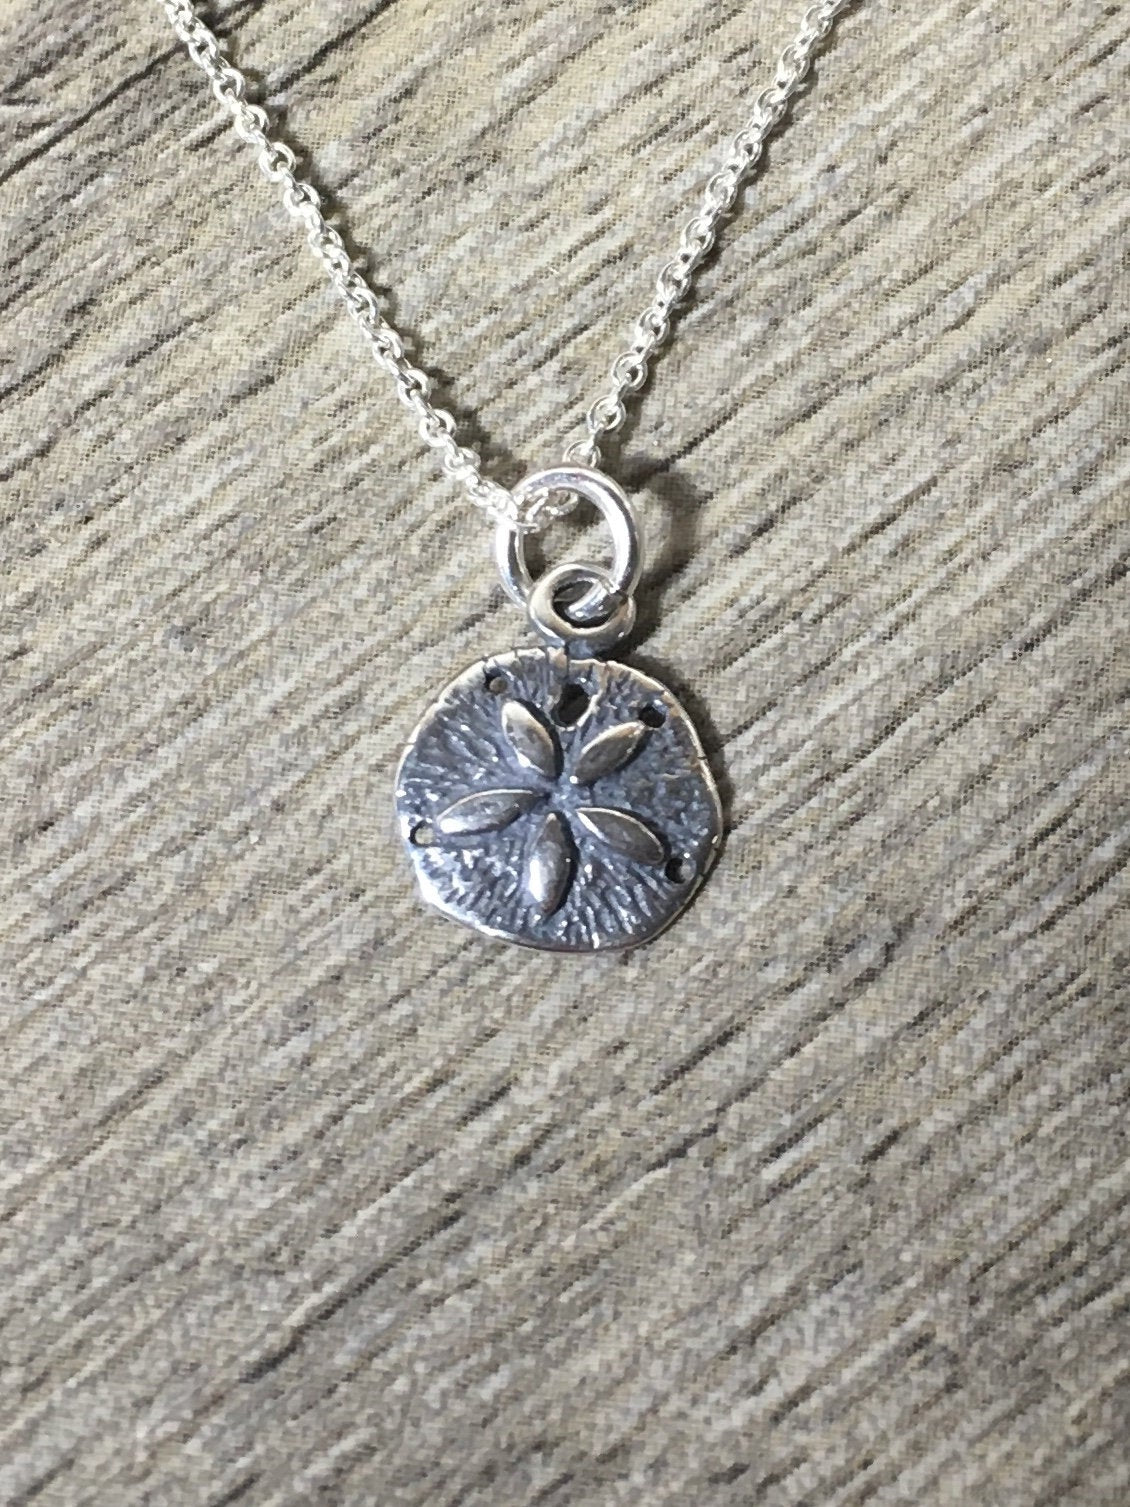 Buy Sterling Silver Sand Dollar Necklace, Beach Necklace, Boho Necklace,  Seashell Necklace, Silver Necklace Online in India - Etsy